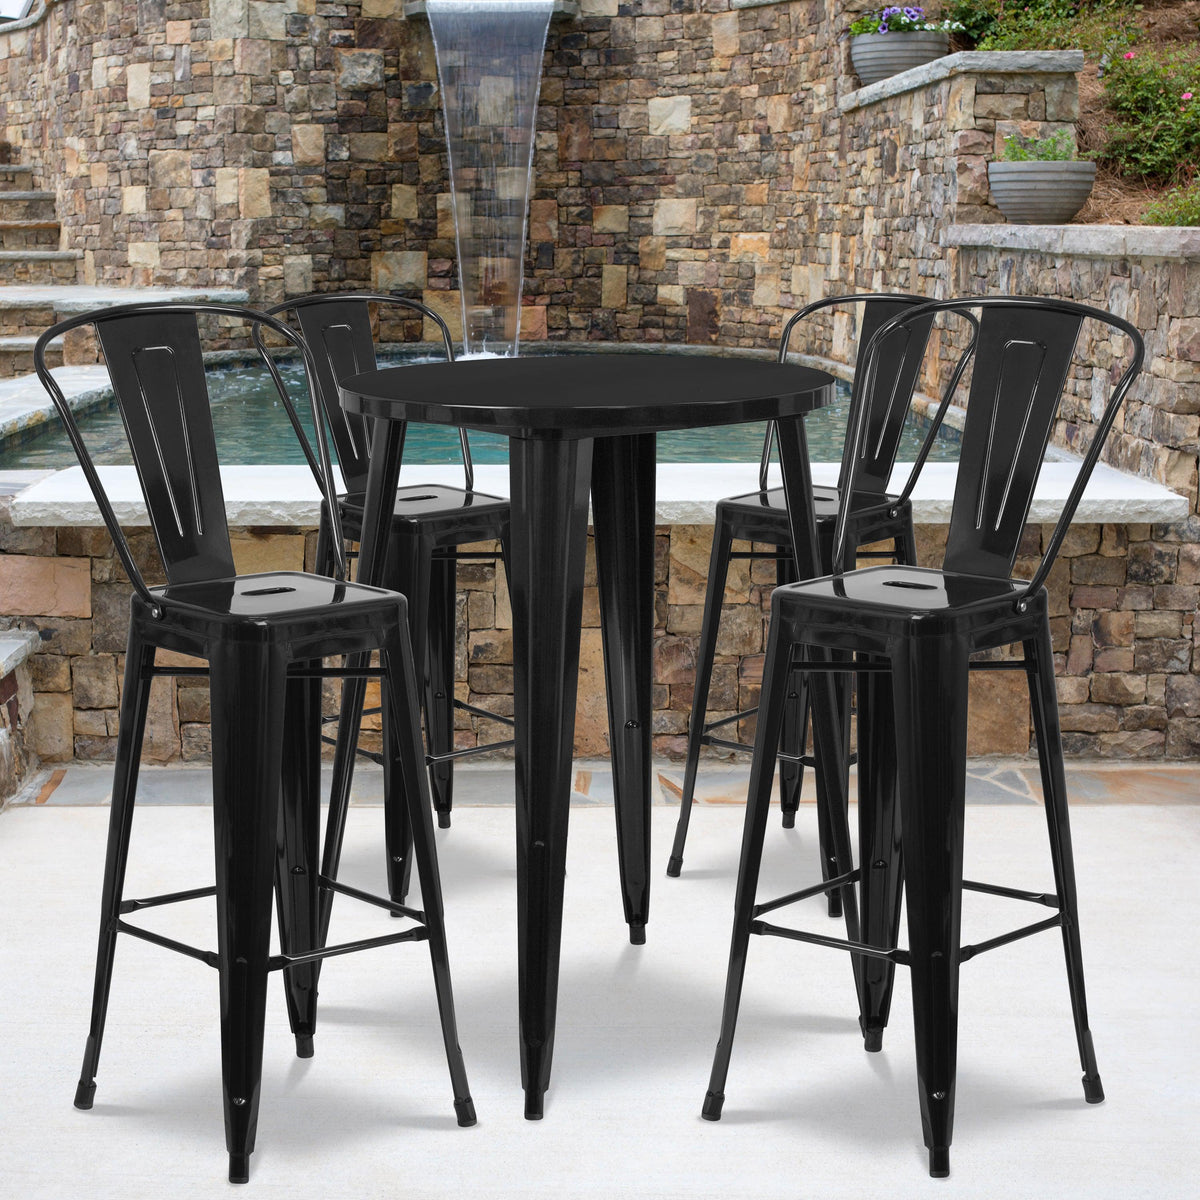 Black |#| 30inch Round Black Metal Indoor-Outdoor Bar Table Set with 4 Cafe Stools